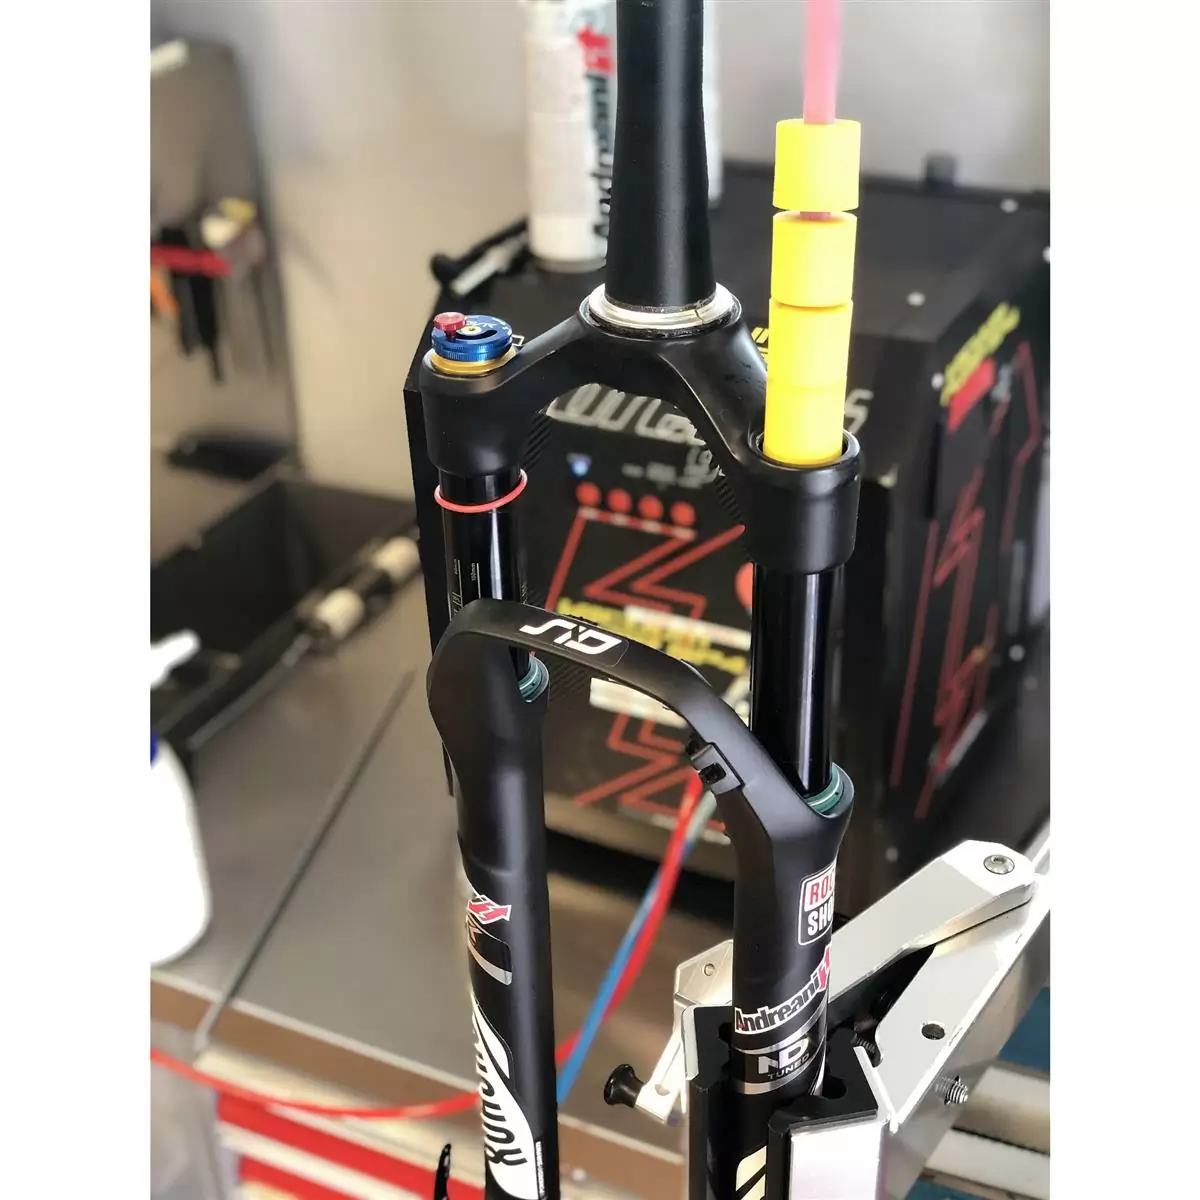 Kit tuning forcella Öhlins – Cannondale #2